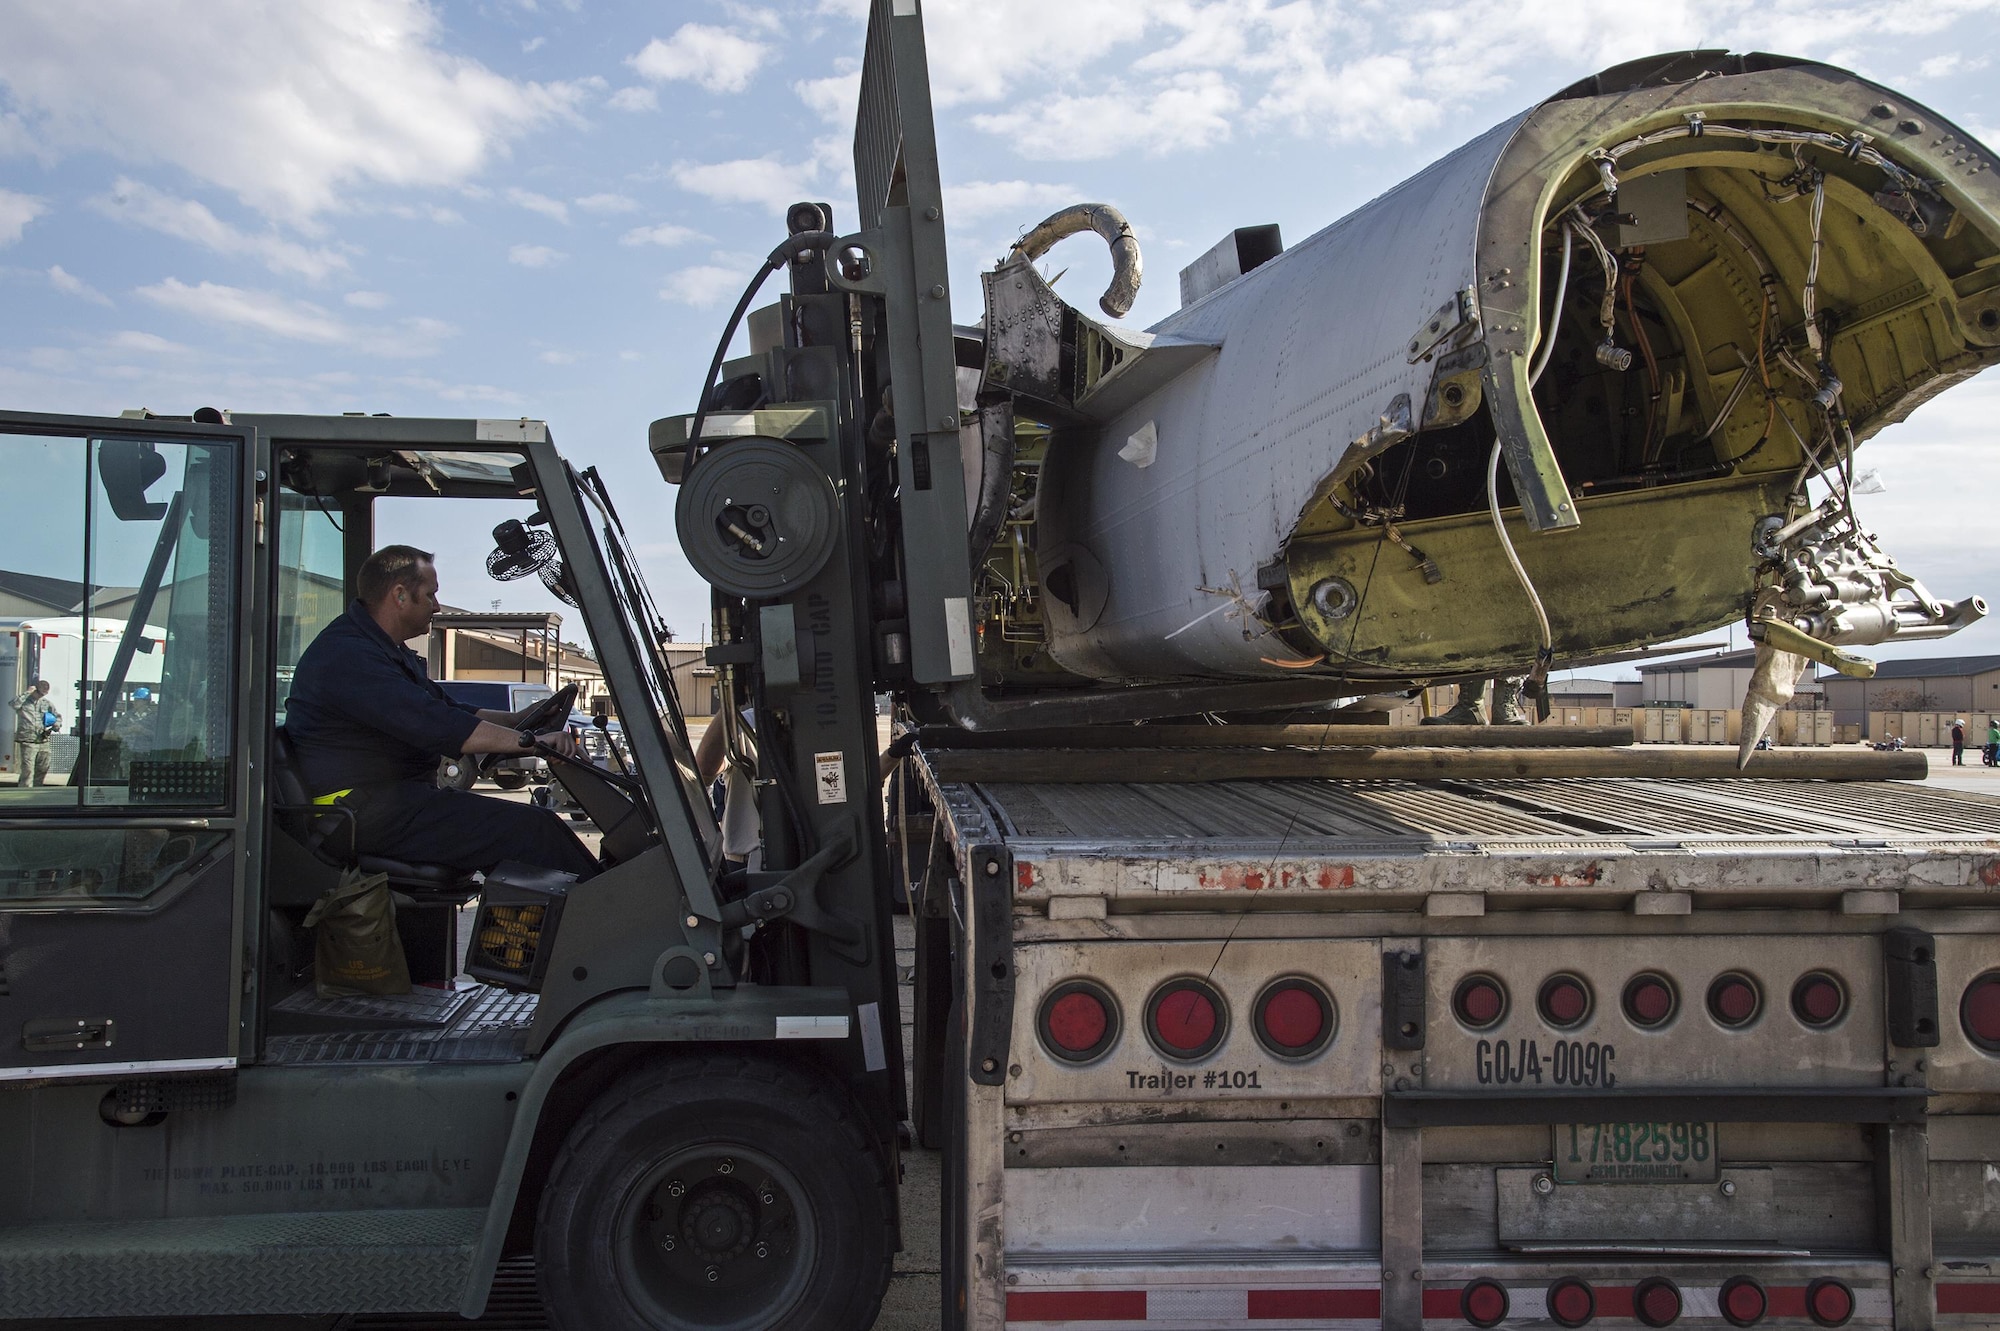 Tech. Sgt. Richard Paulk 23d Equipment Maintenance Squadron repair and reclamation craftsman uses a forklift to lower the fuselage of an A-10A Thunderbolt II onto a flatbed truck, Dec. 1, 2016, at Moody Air Force Base, Ga. This was Moody’s last A-10A which was manufactured in 1980 in Baltimore, Md., and was officially completed on Nov. 3, 1981. (U.S. Air Force photo by Staff Sgt. Eric Summers)